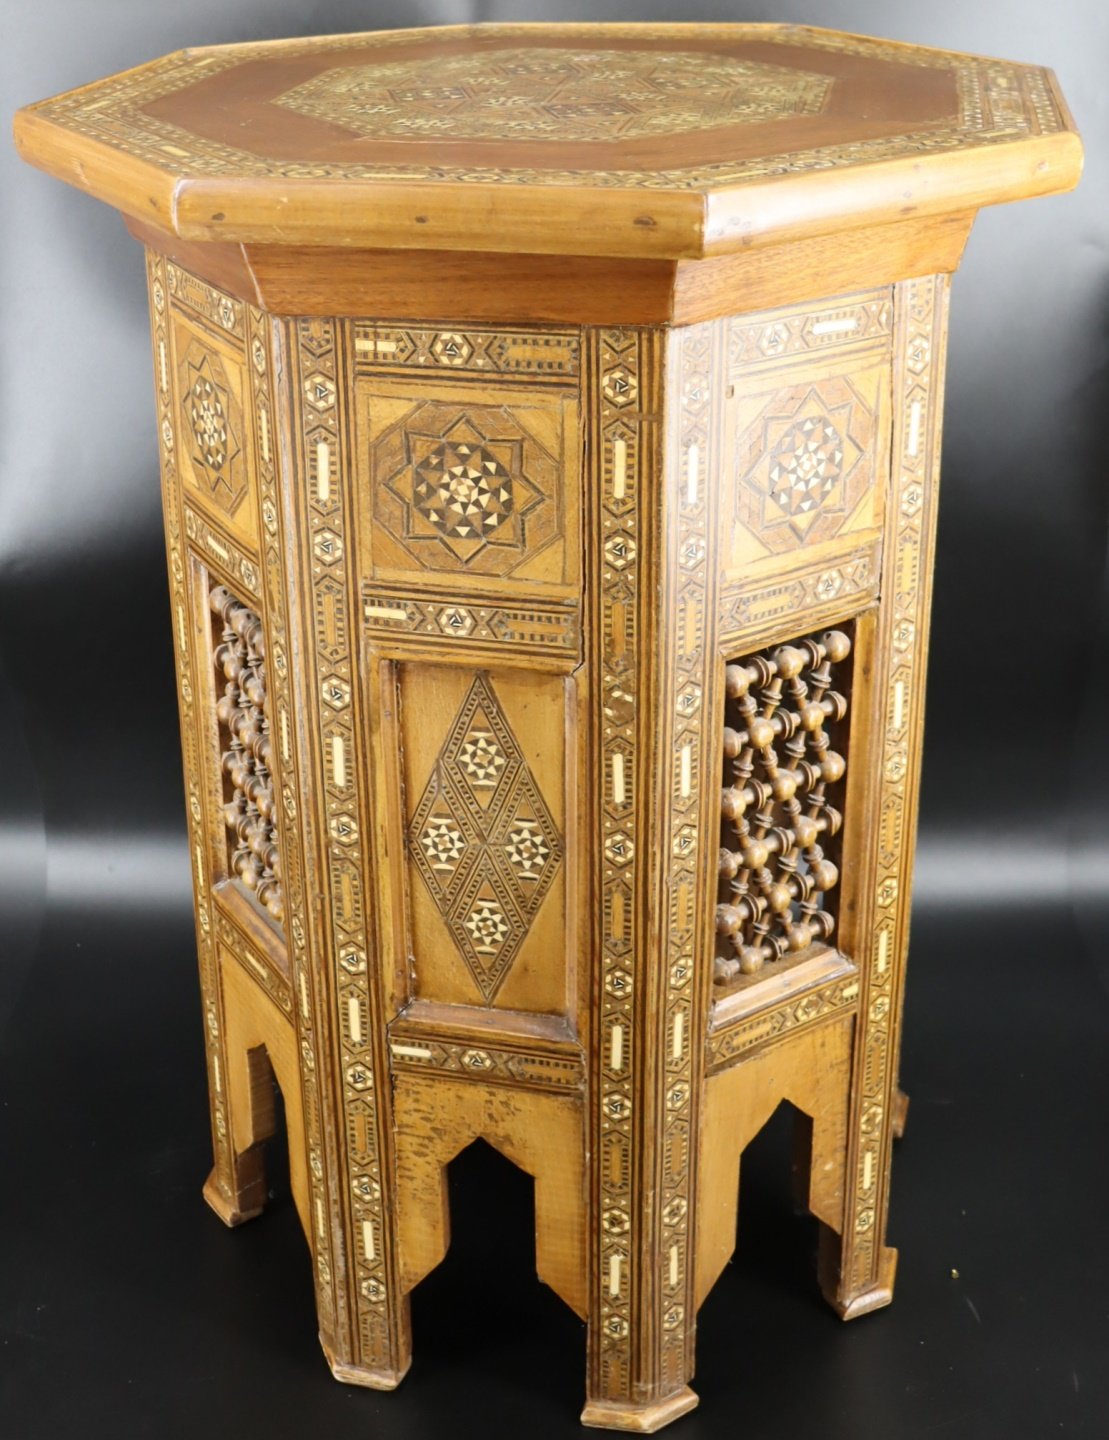 ANTIQUE INLAID SYRIAN TABLE. Octagonal